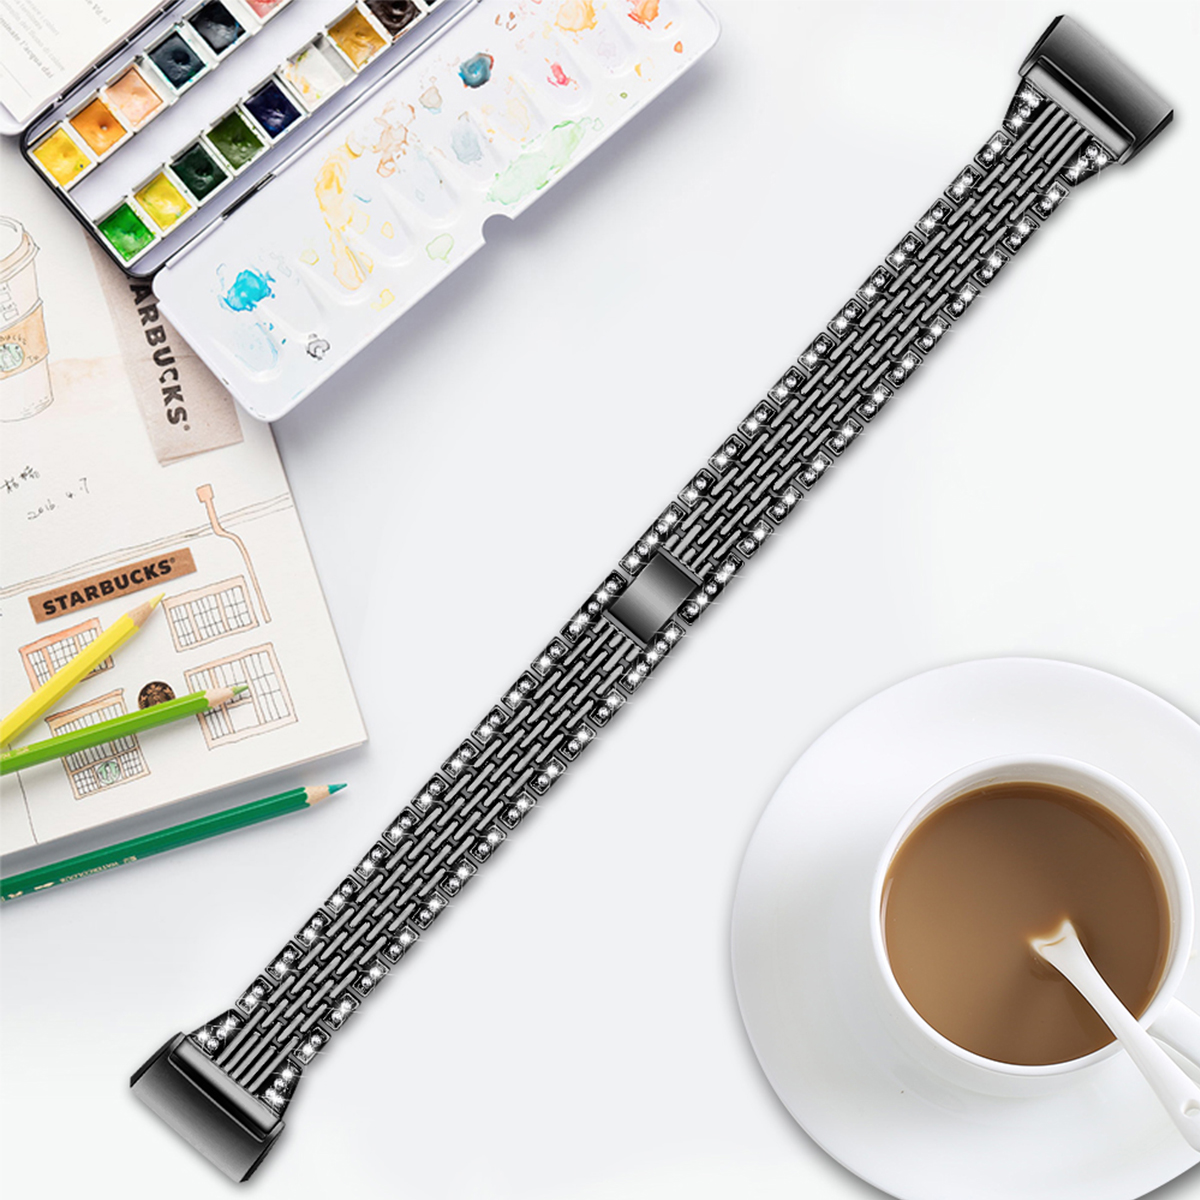 Luxury-Stainles-Steel-Watch-Band-Watch-Strap-Replacement-for-Fitbit-Charge-3-1534078-6